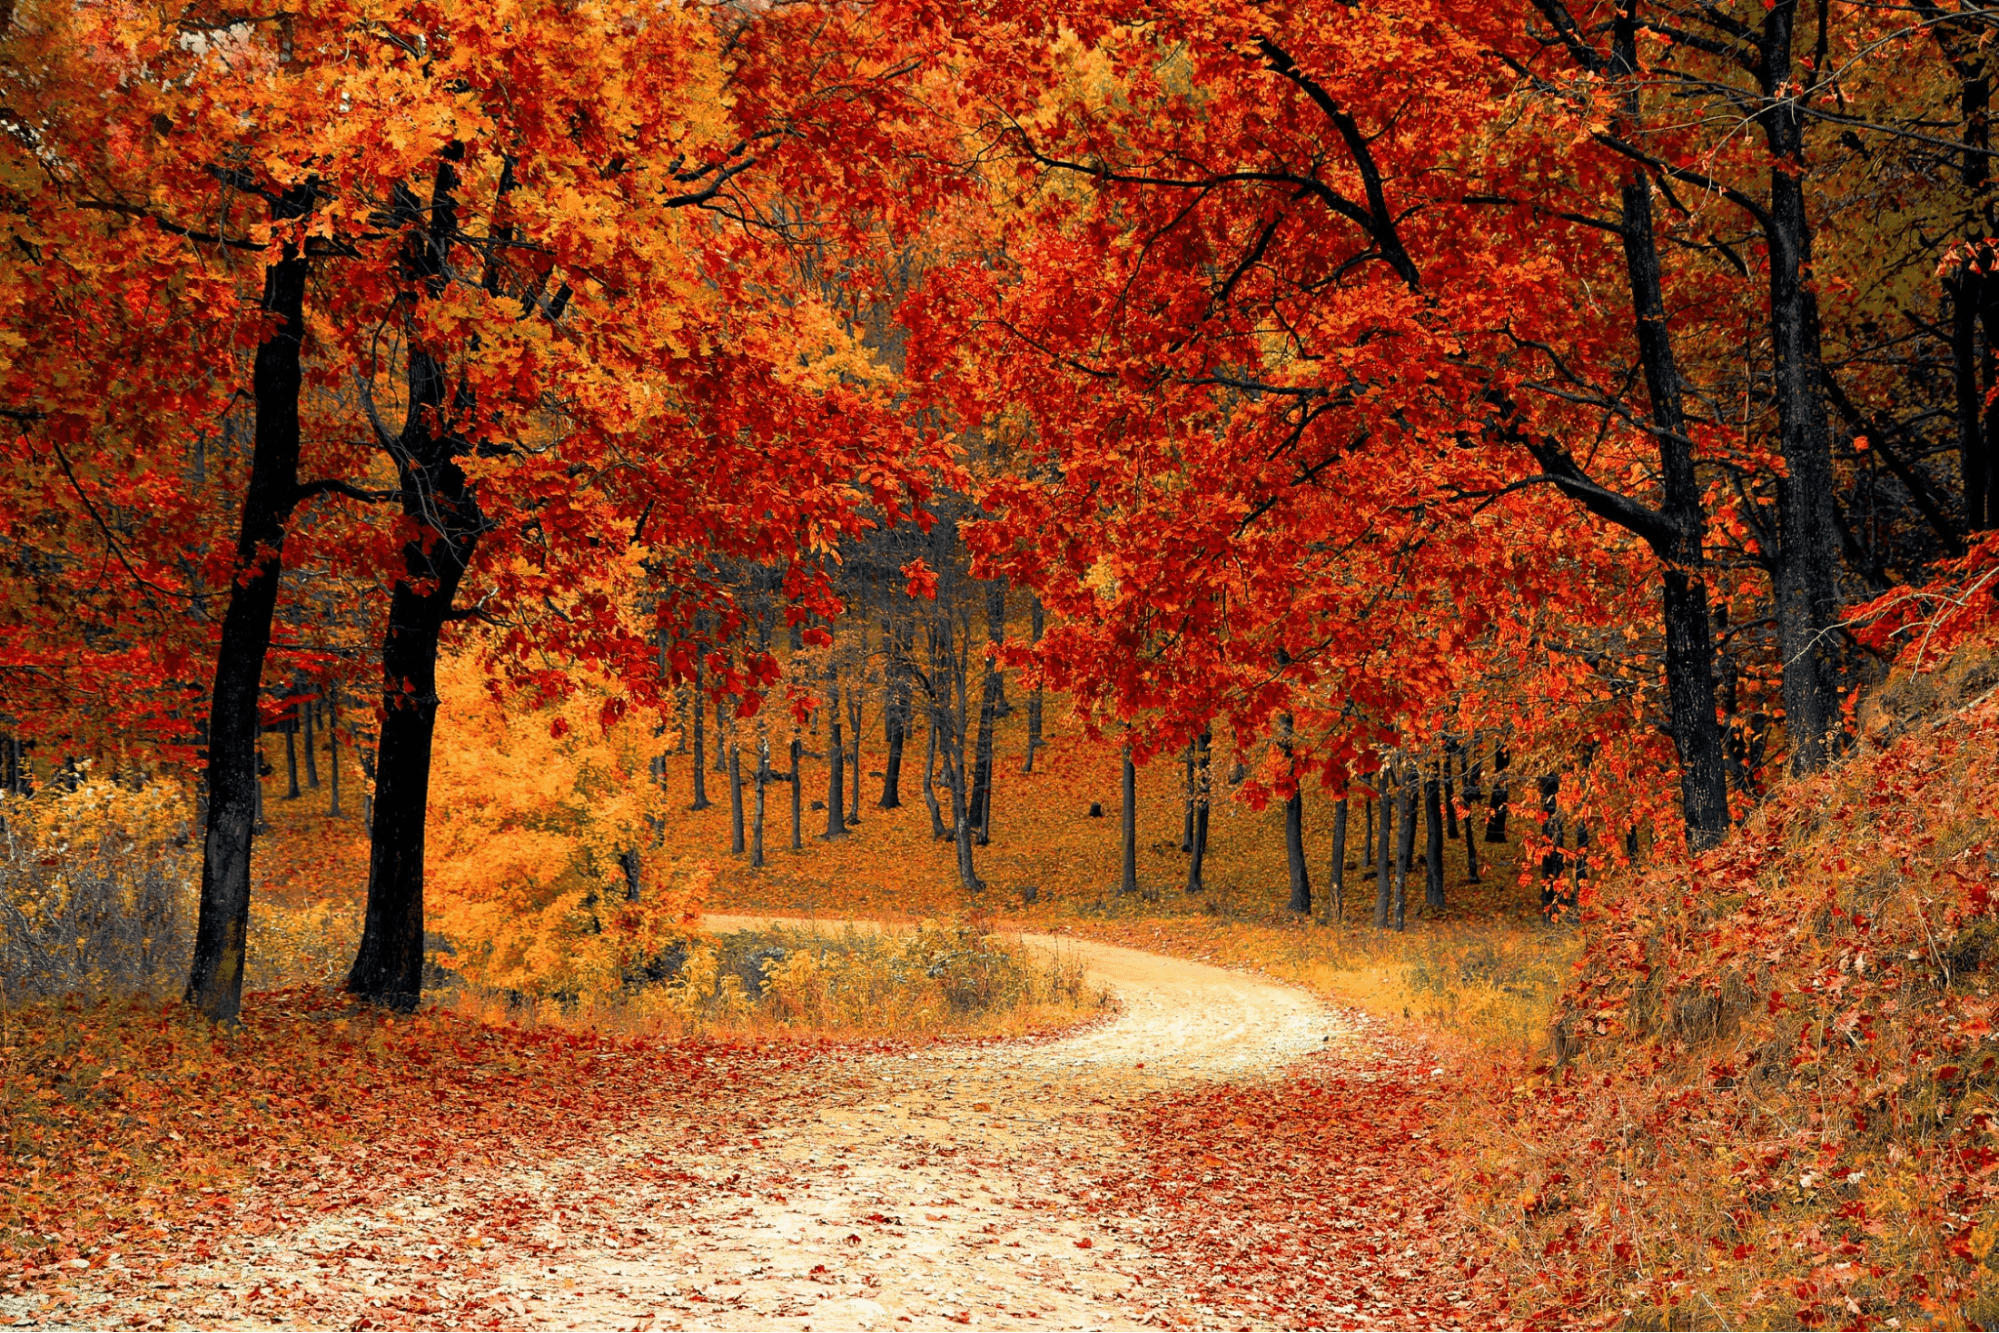 Trees during the fall with colorful leaves